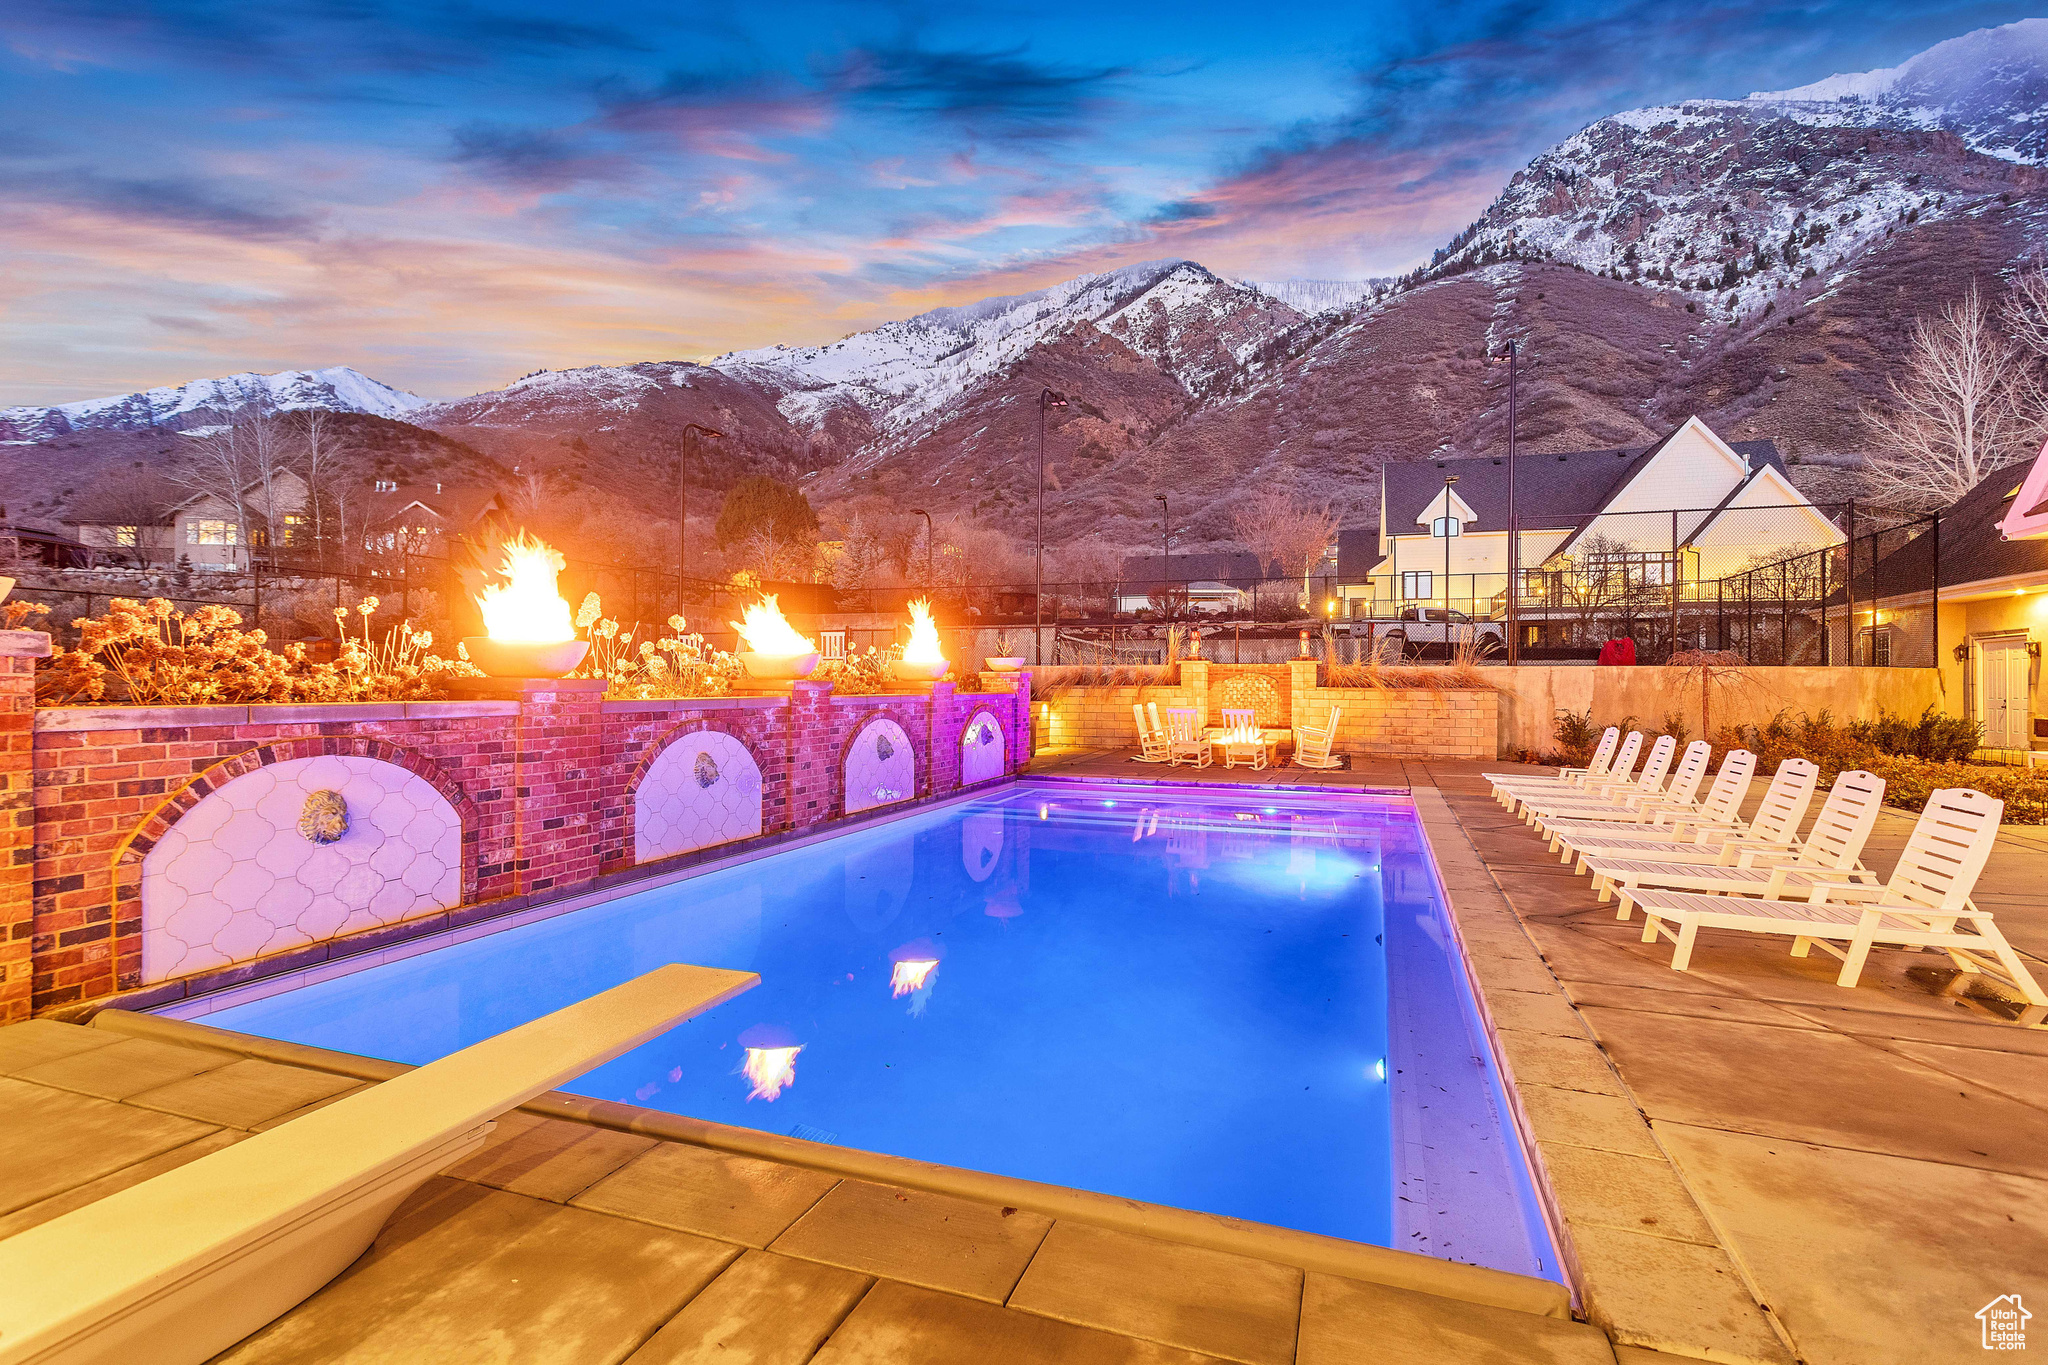 Pool at dusk with a mountain view, a patio, and a diving board